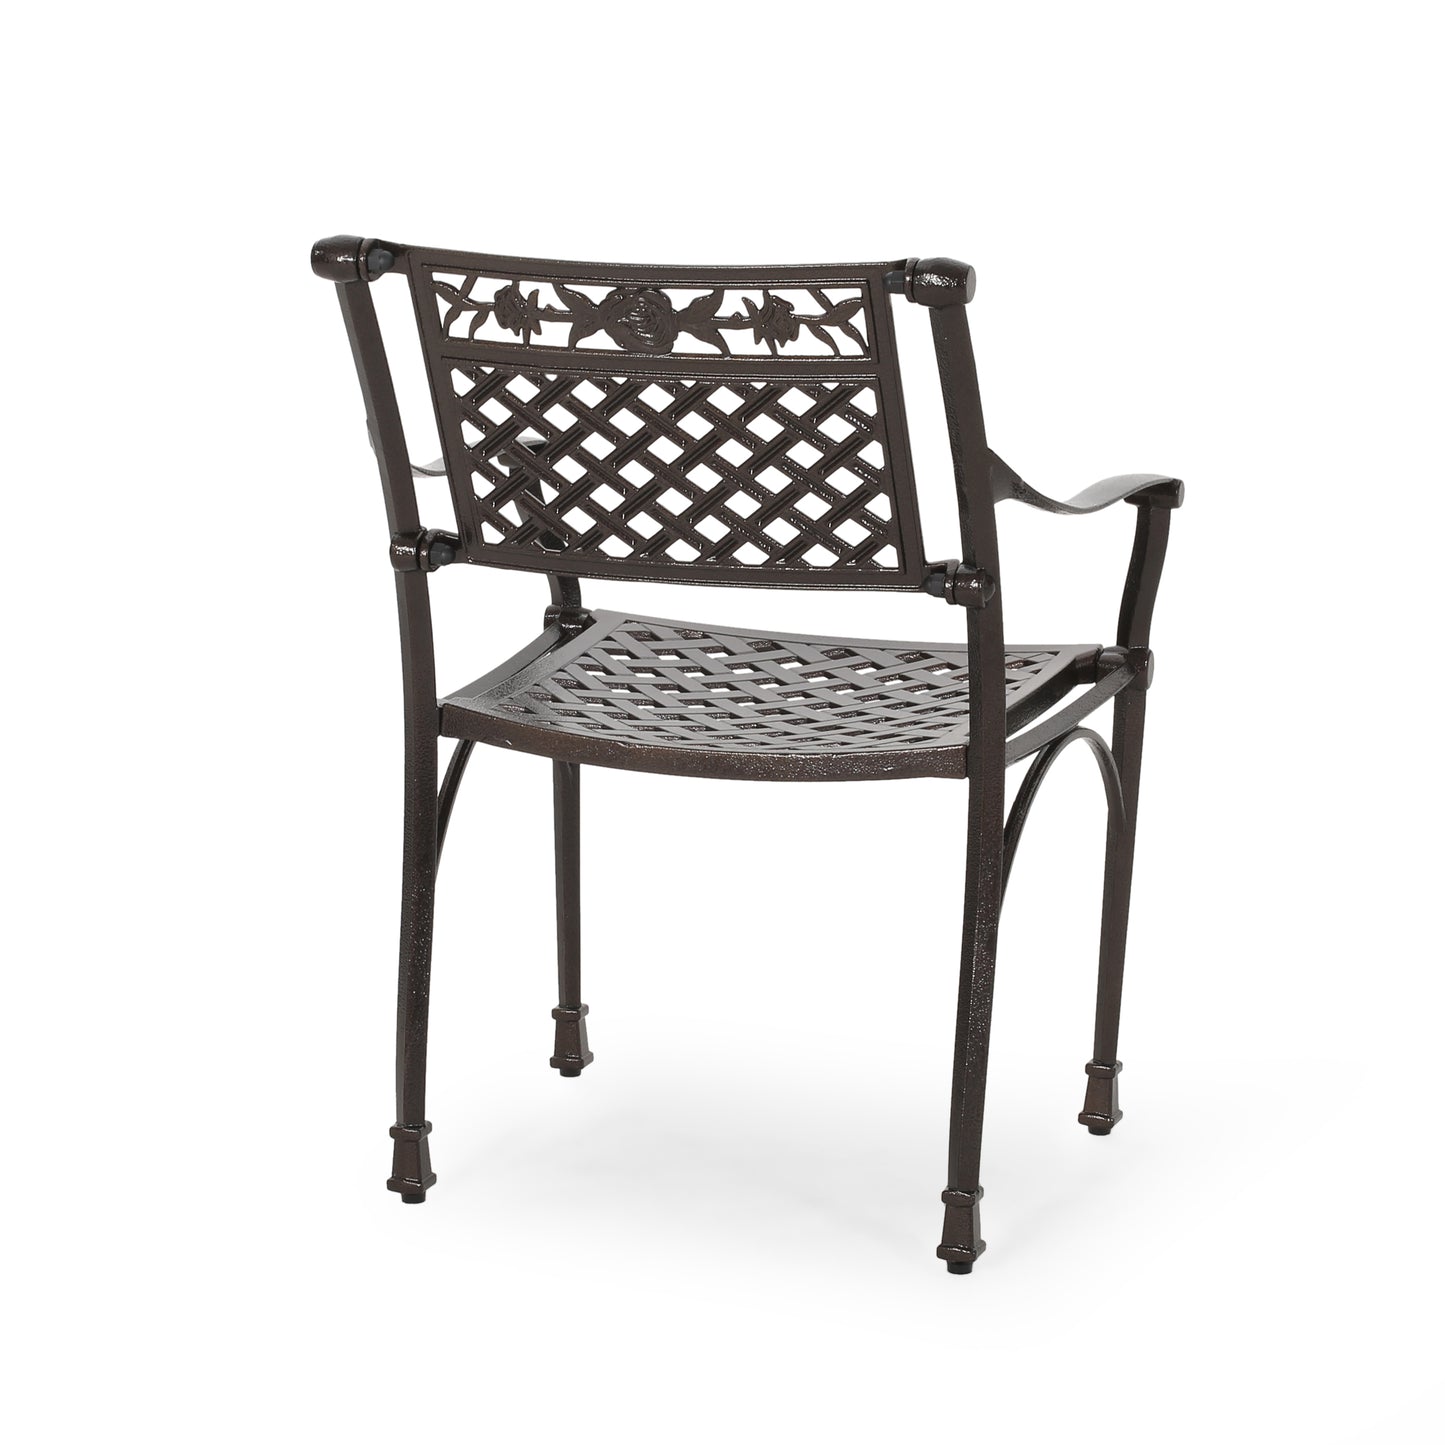 Ridgecrest Traditional Outdoor Aluminum Dining Chair (Set of 2)